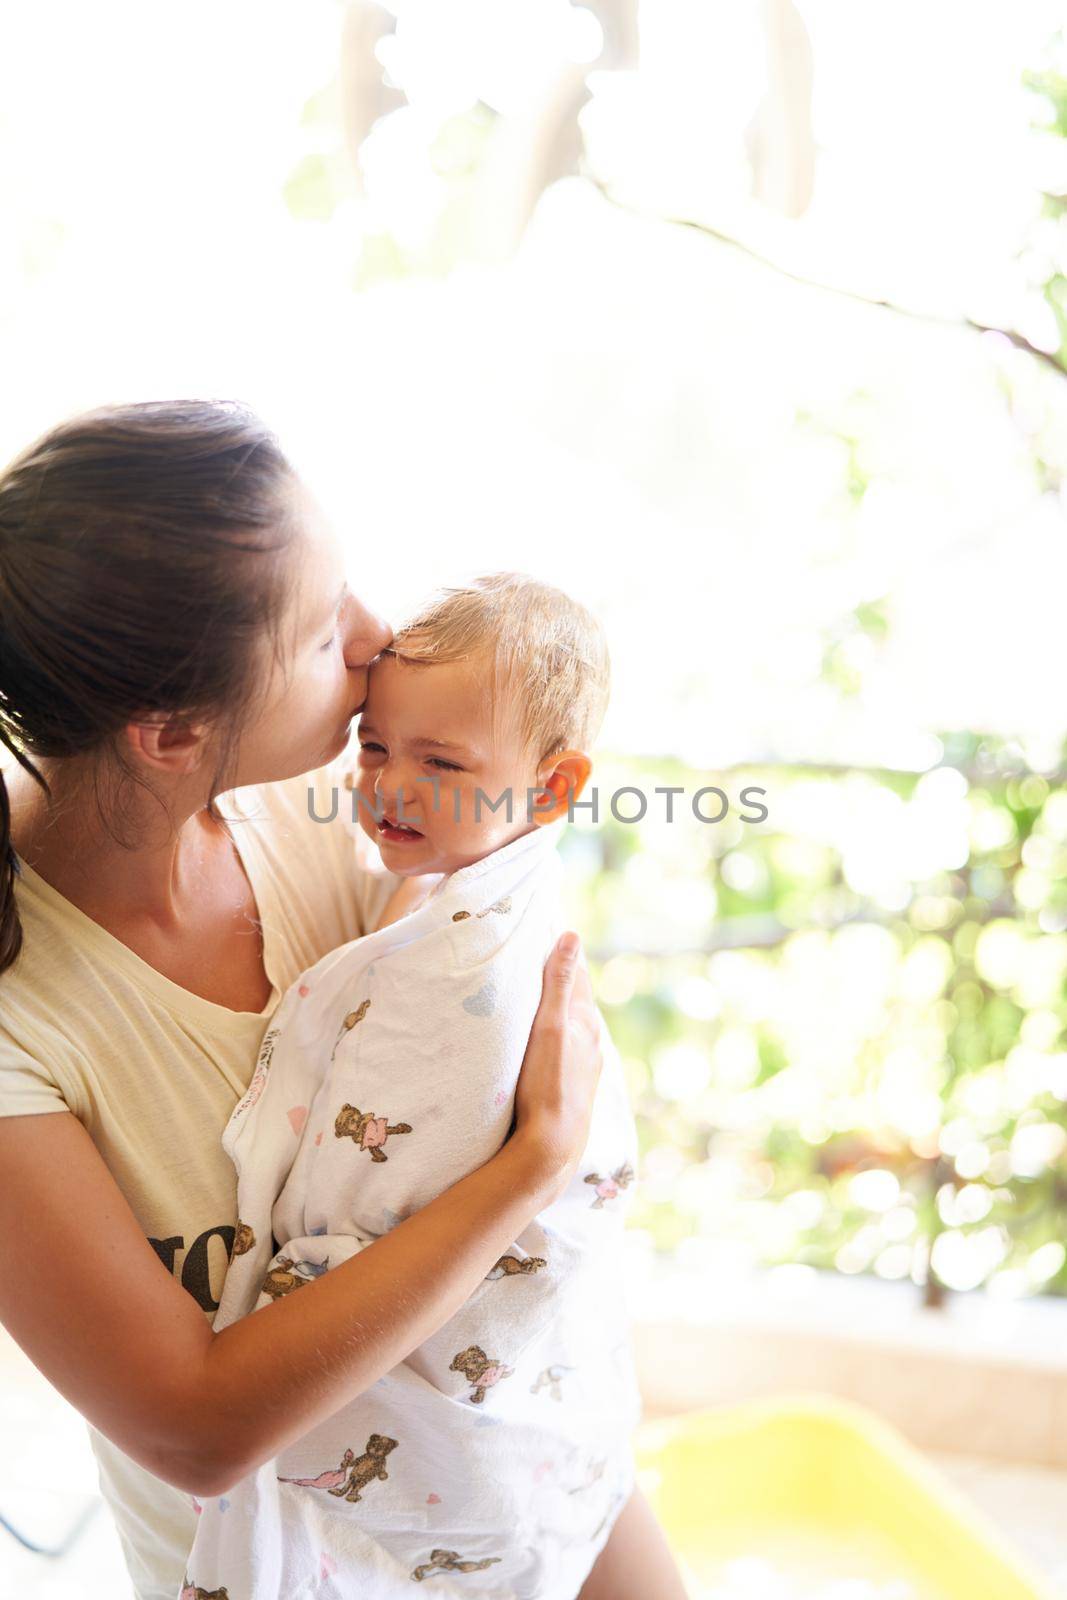 Mom kisses a whimpering baby holding him in her arms. High quality photo